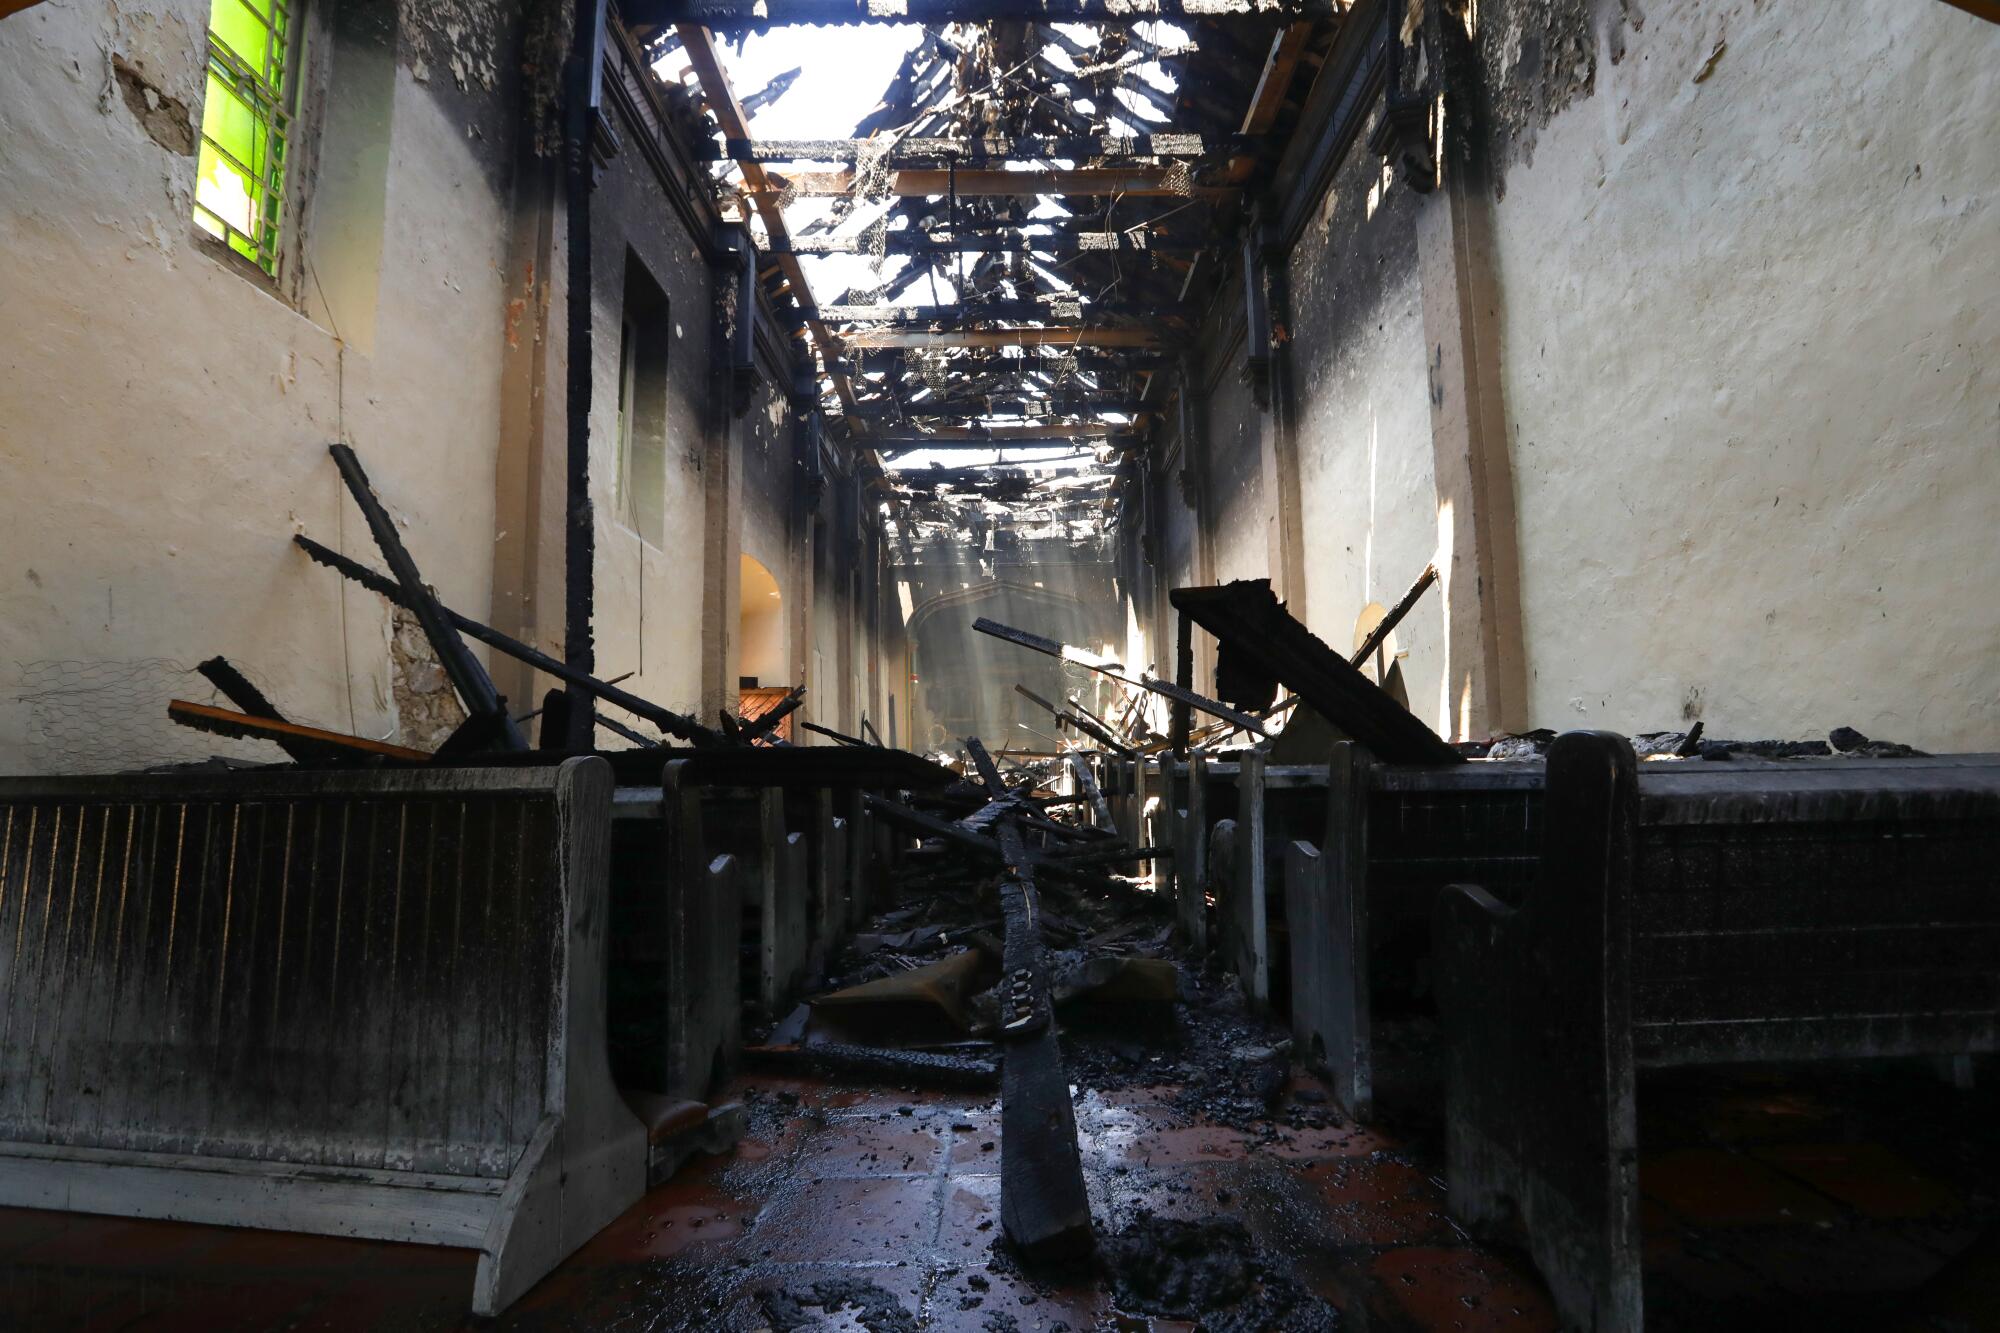 Sunlight beams through the destroyed roof onto charred pews inside the San Gabriel Mission